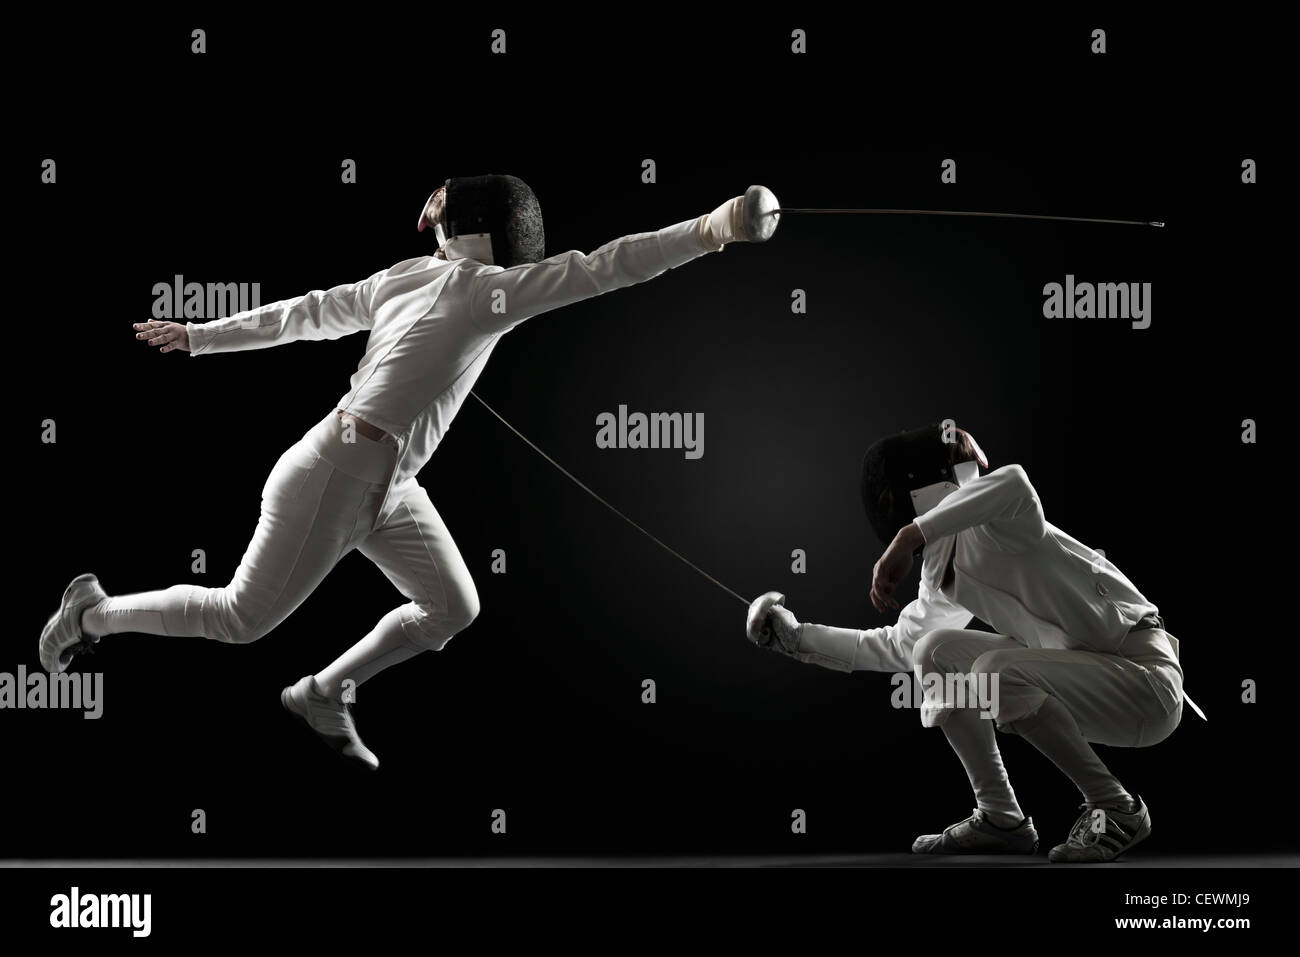 Fencers fencing Stock Photo